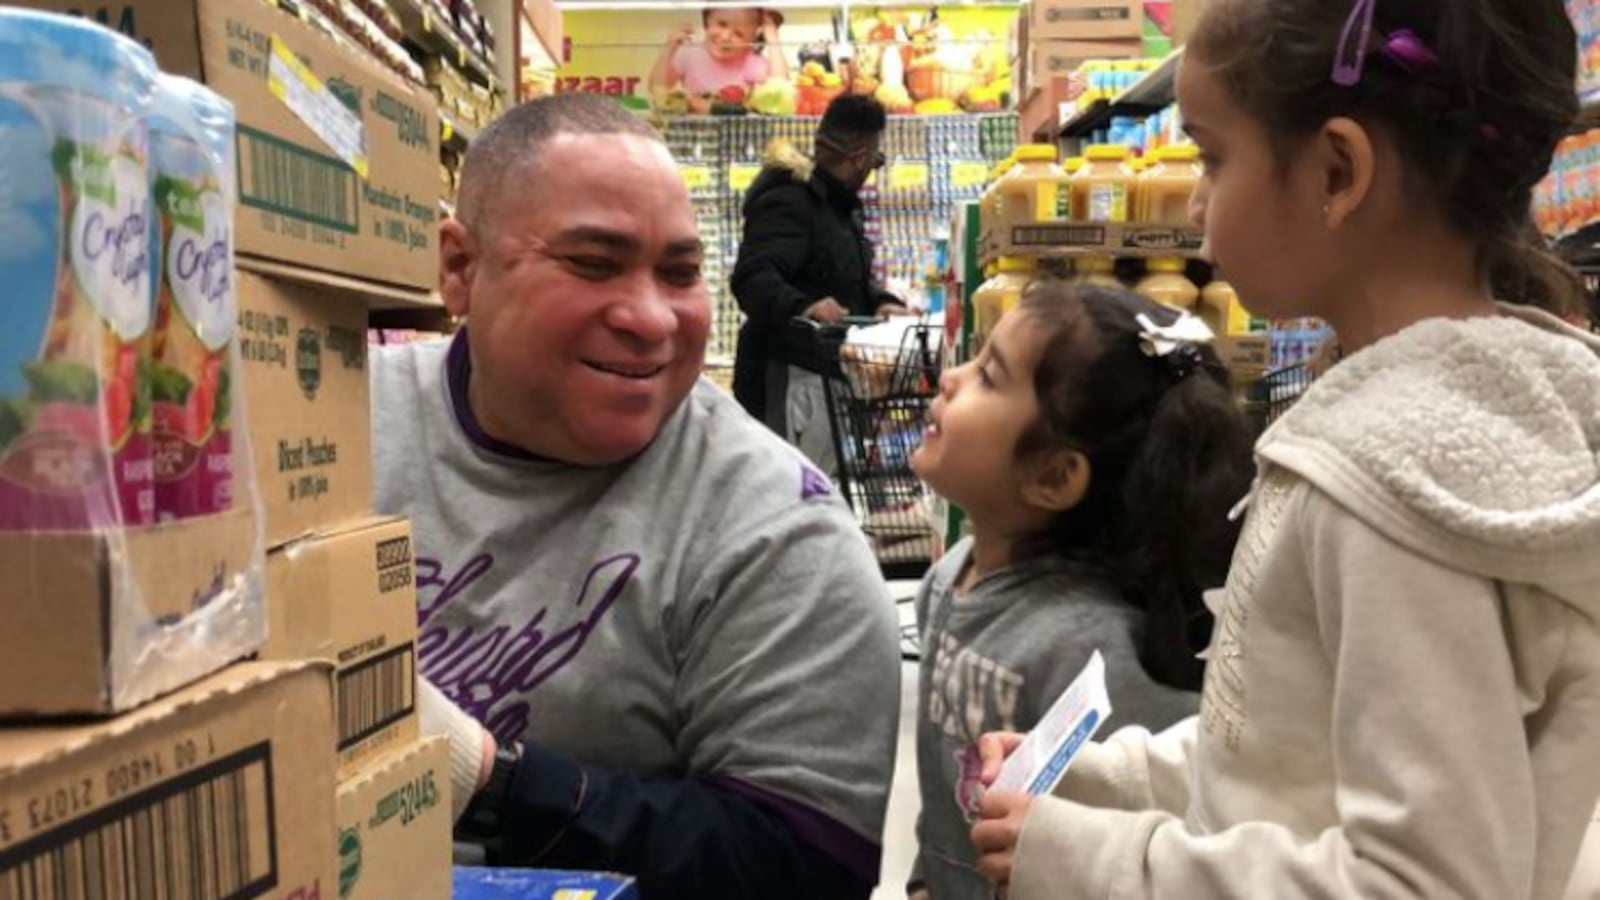 Cailynn, 3, and her big sister Chrystie, 5, ask a Food Bazaar worker for help with the scavenger hunt, Jan. 30, 2020.